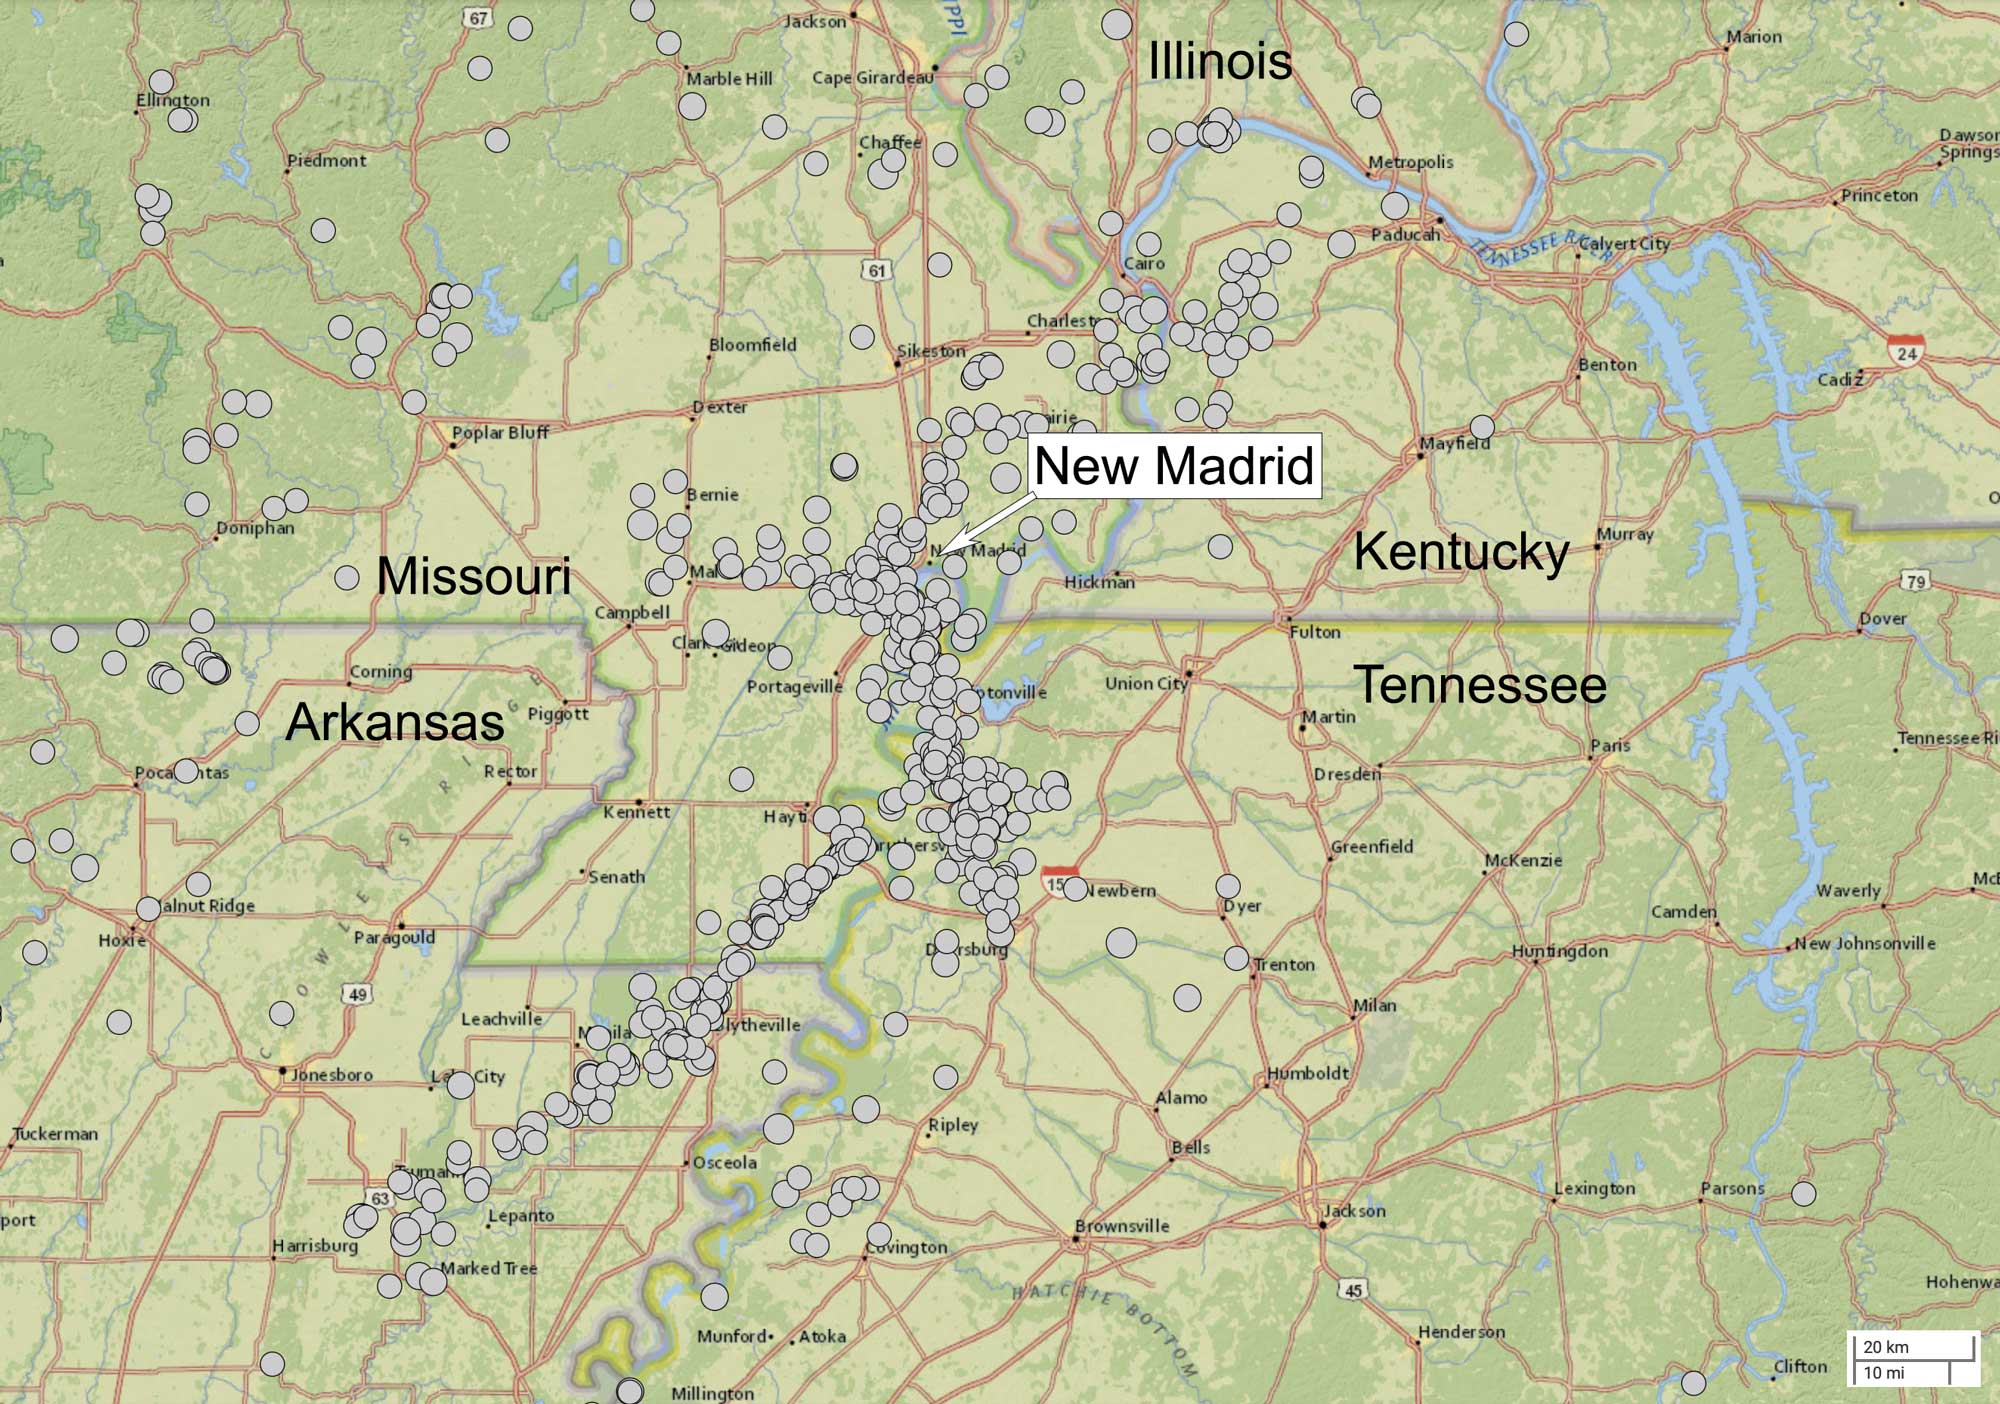 Map showing the epicenters of earthquakes in the New Madrid seismic zone from 1950 to 2022.